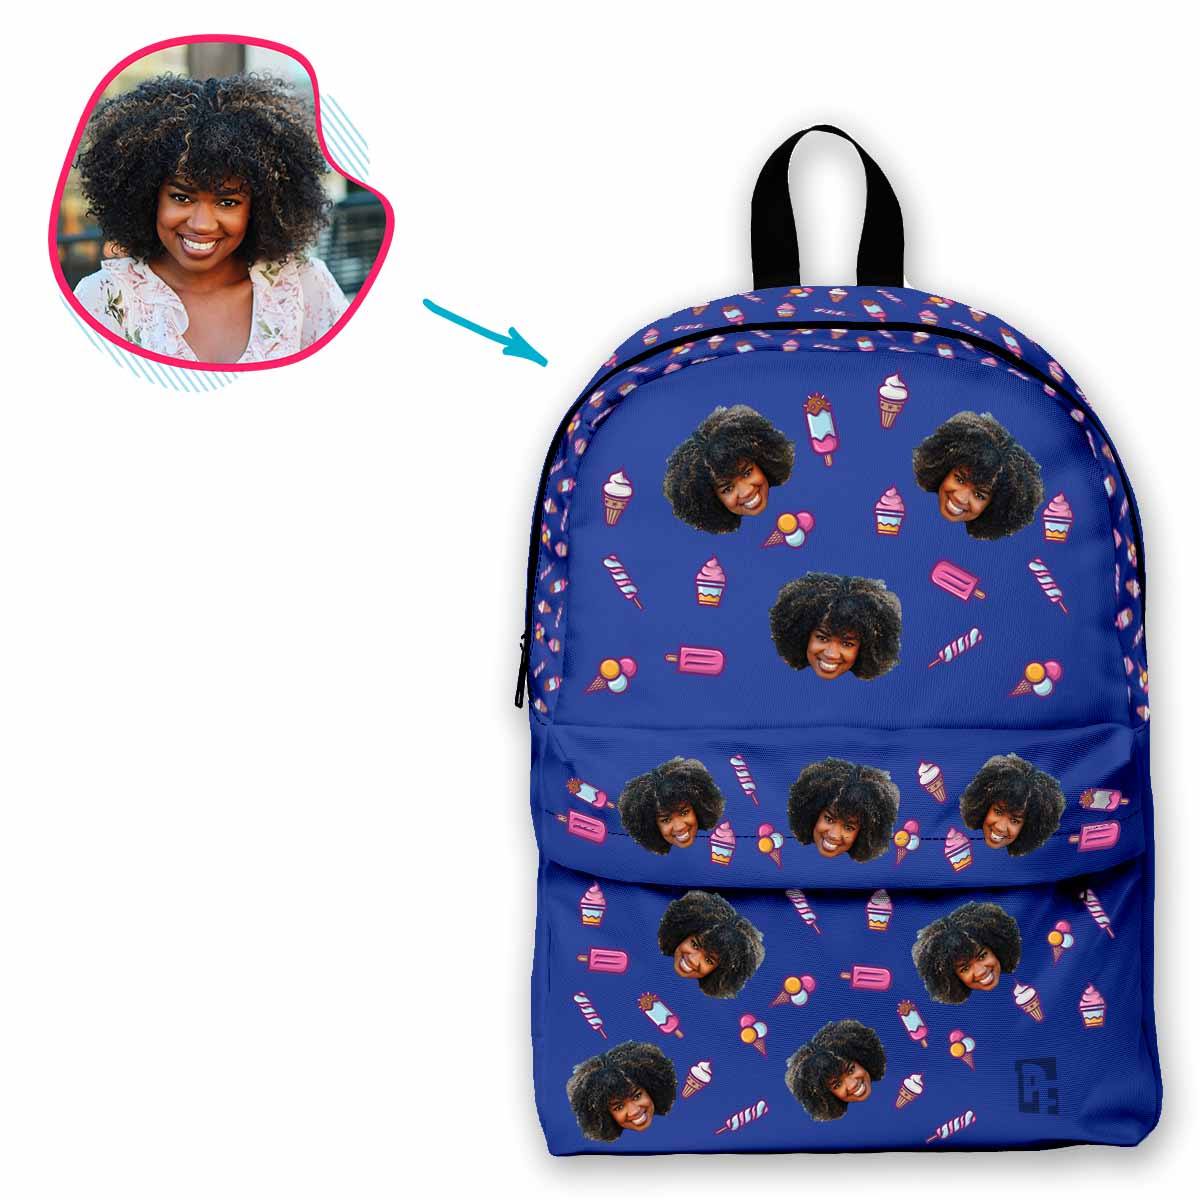 darkblue Candies classic backpack personalized with photo of face printed on it